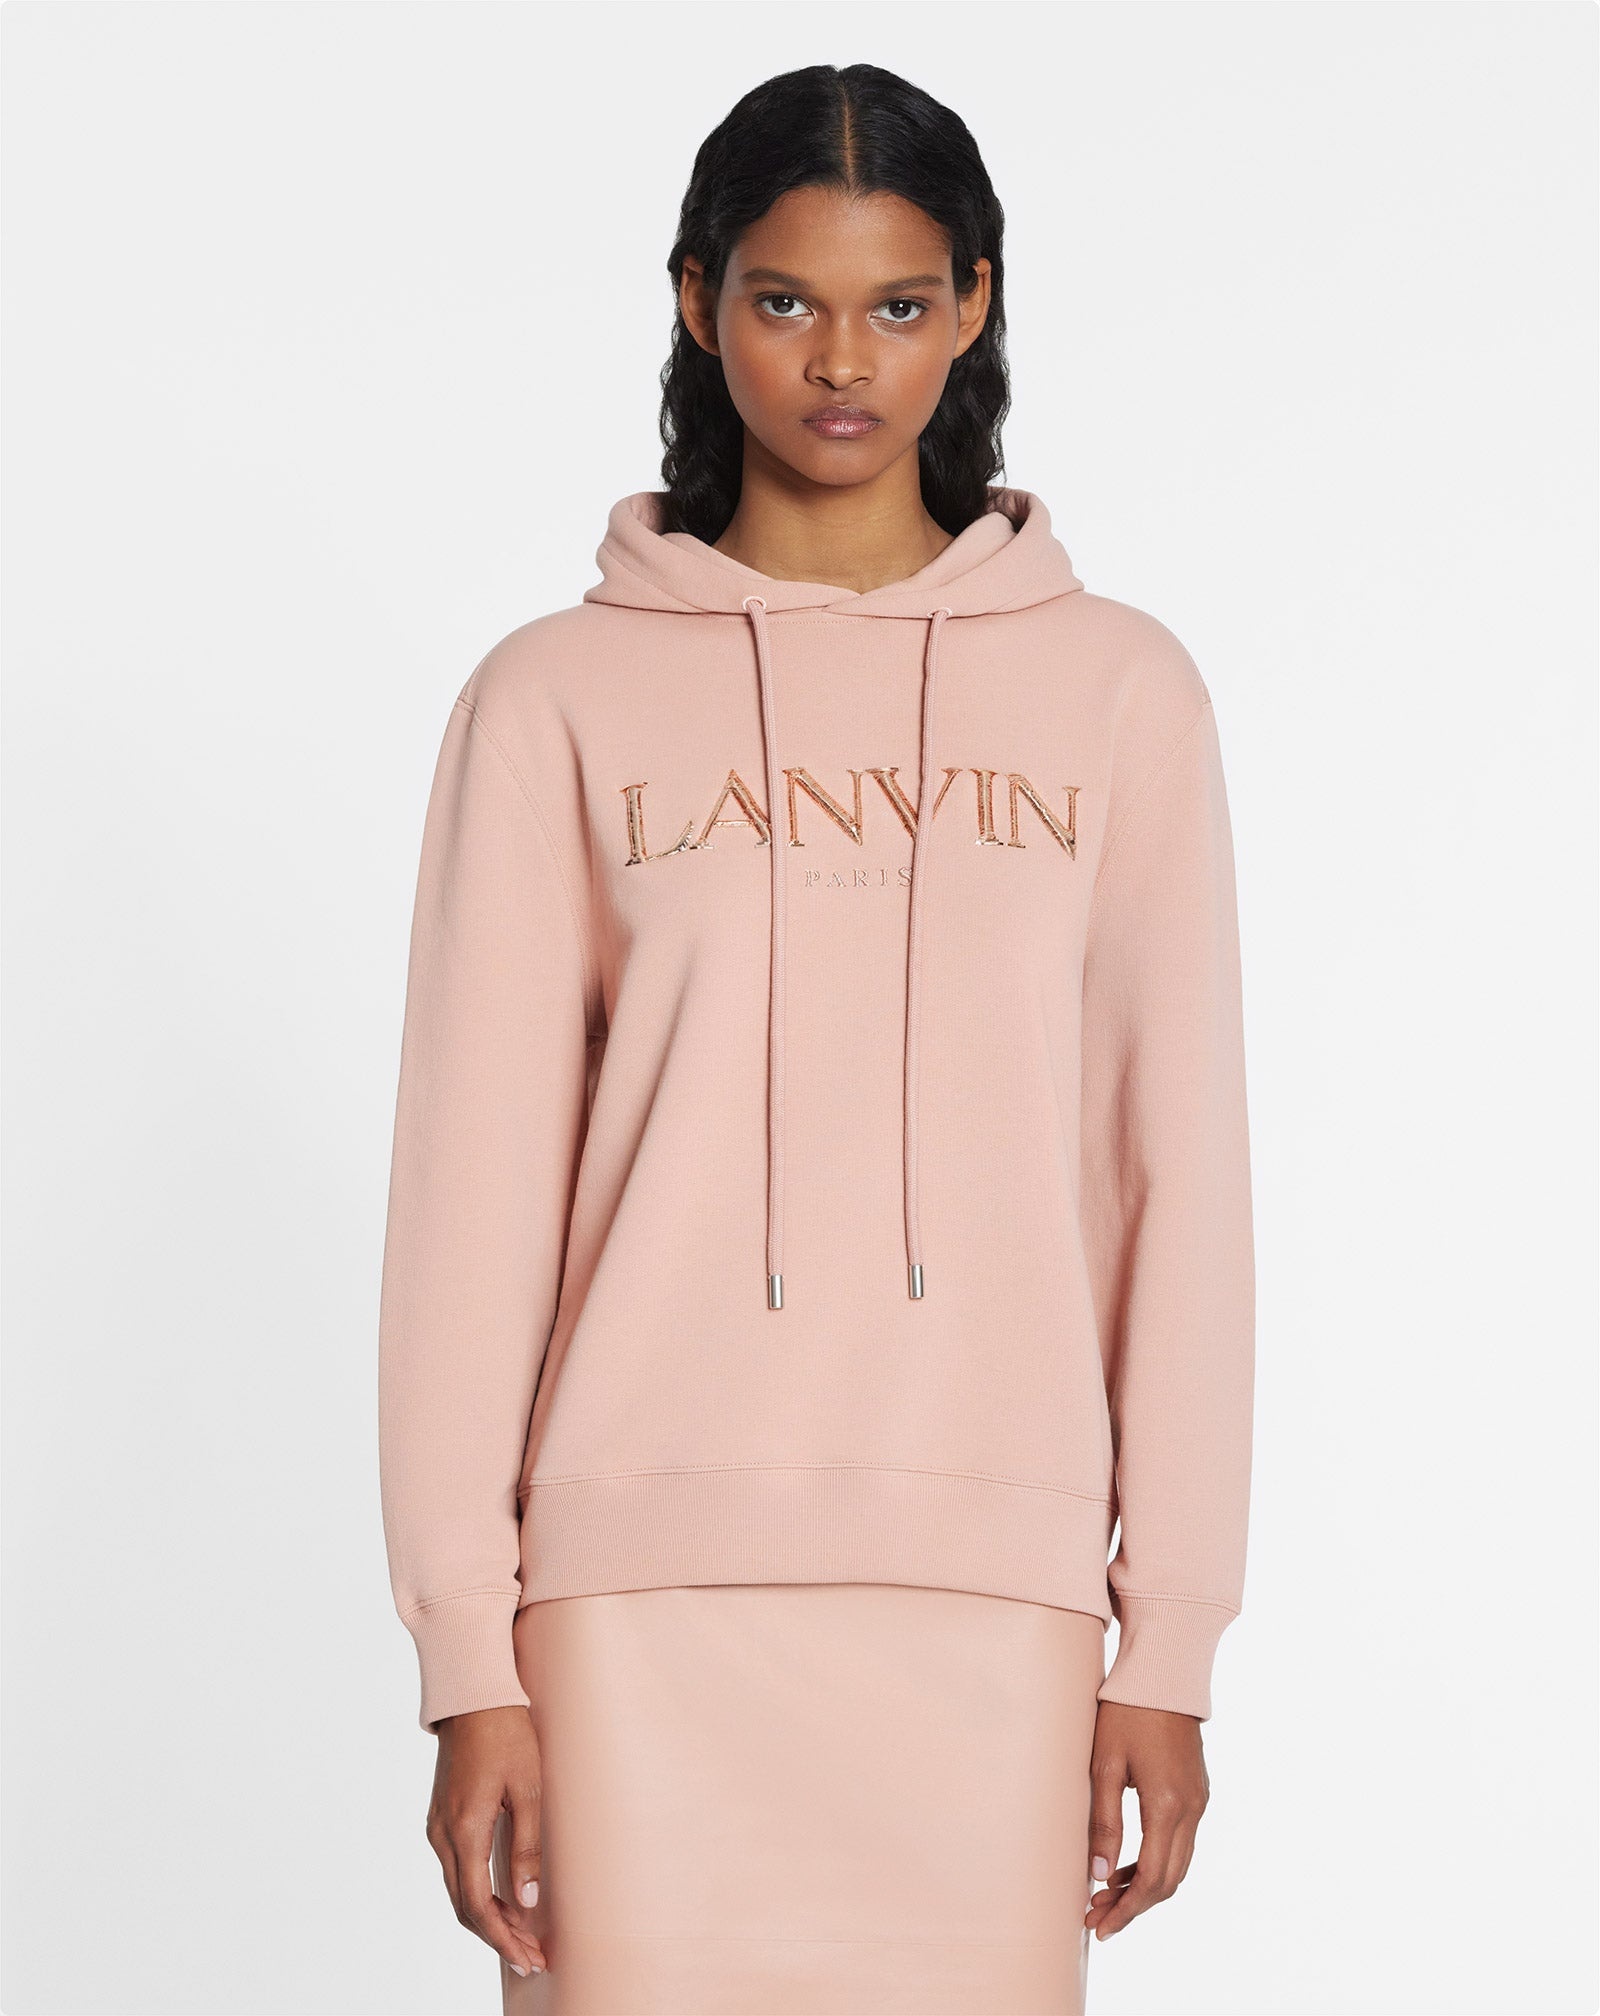 LANVIN PARIS EMBROIDERED HOODED SWEATER - 3